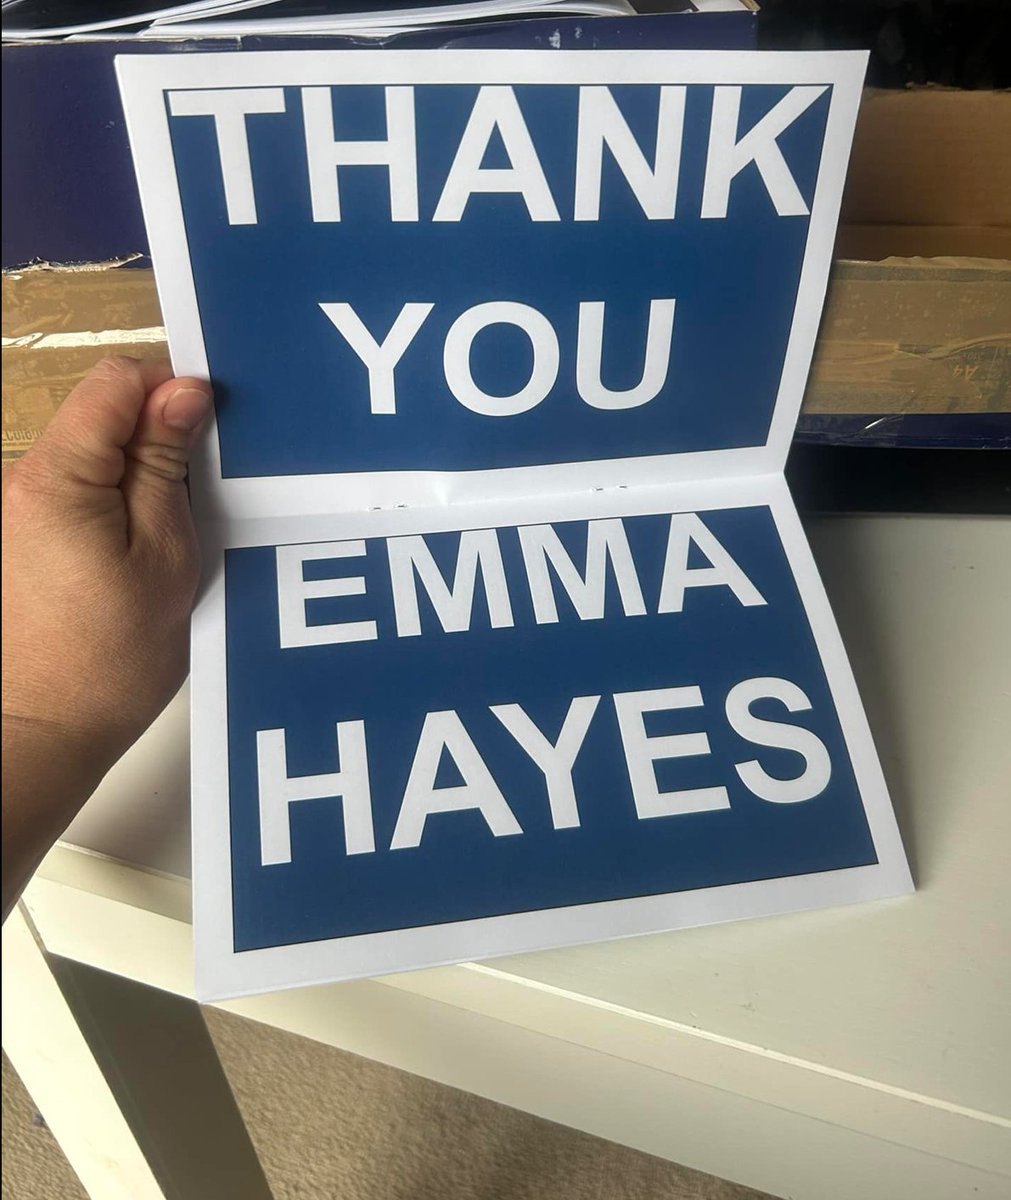 MATCHDAY! Issue 12 will be available to buy next to the Kingsmeadow sign from around 4:45-5pm. A special 'Thank You Emma Hayes' poster is printed in the middle so you can show your appreciation to the Boss Copies cost £2, cash or card accepted. 50 copies available! See you there